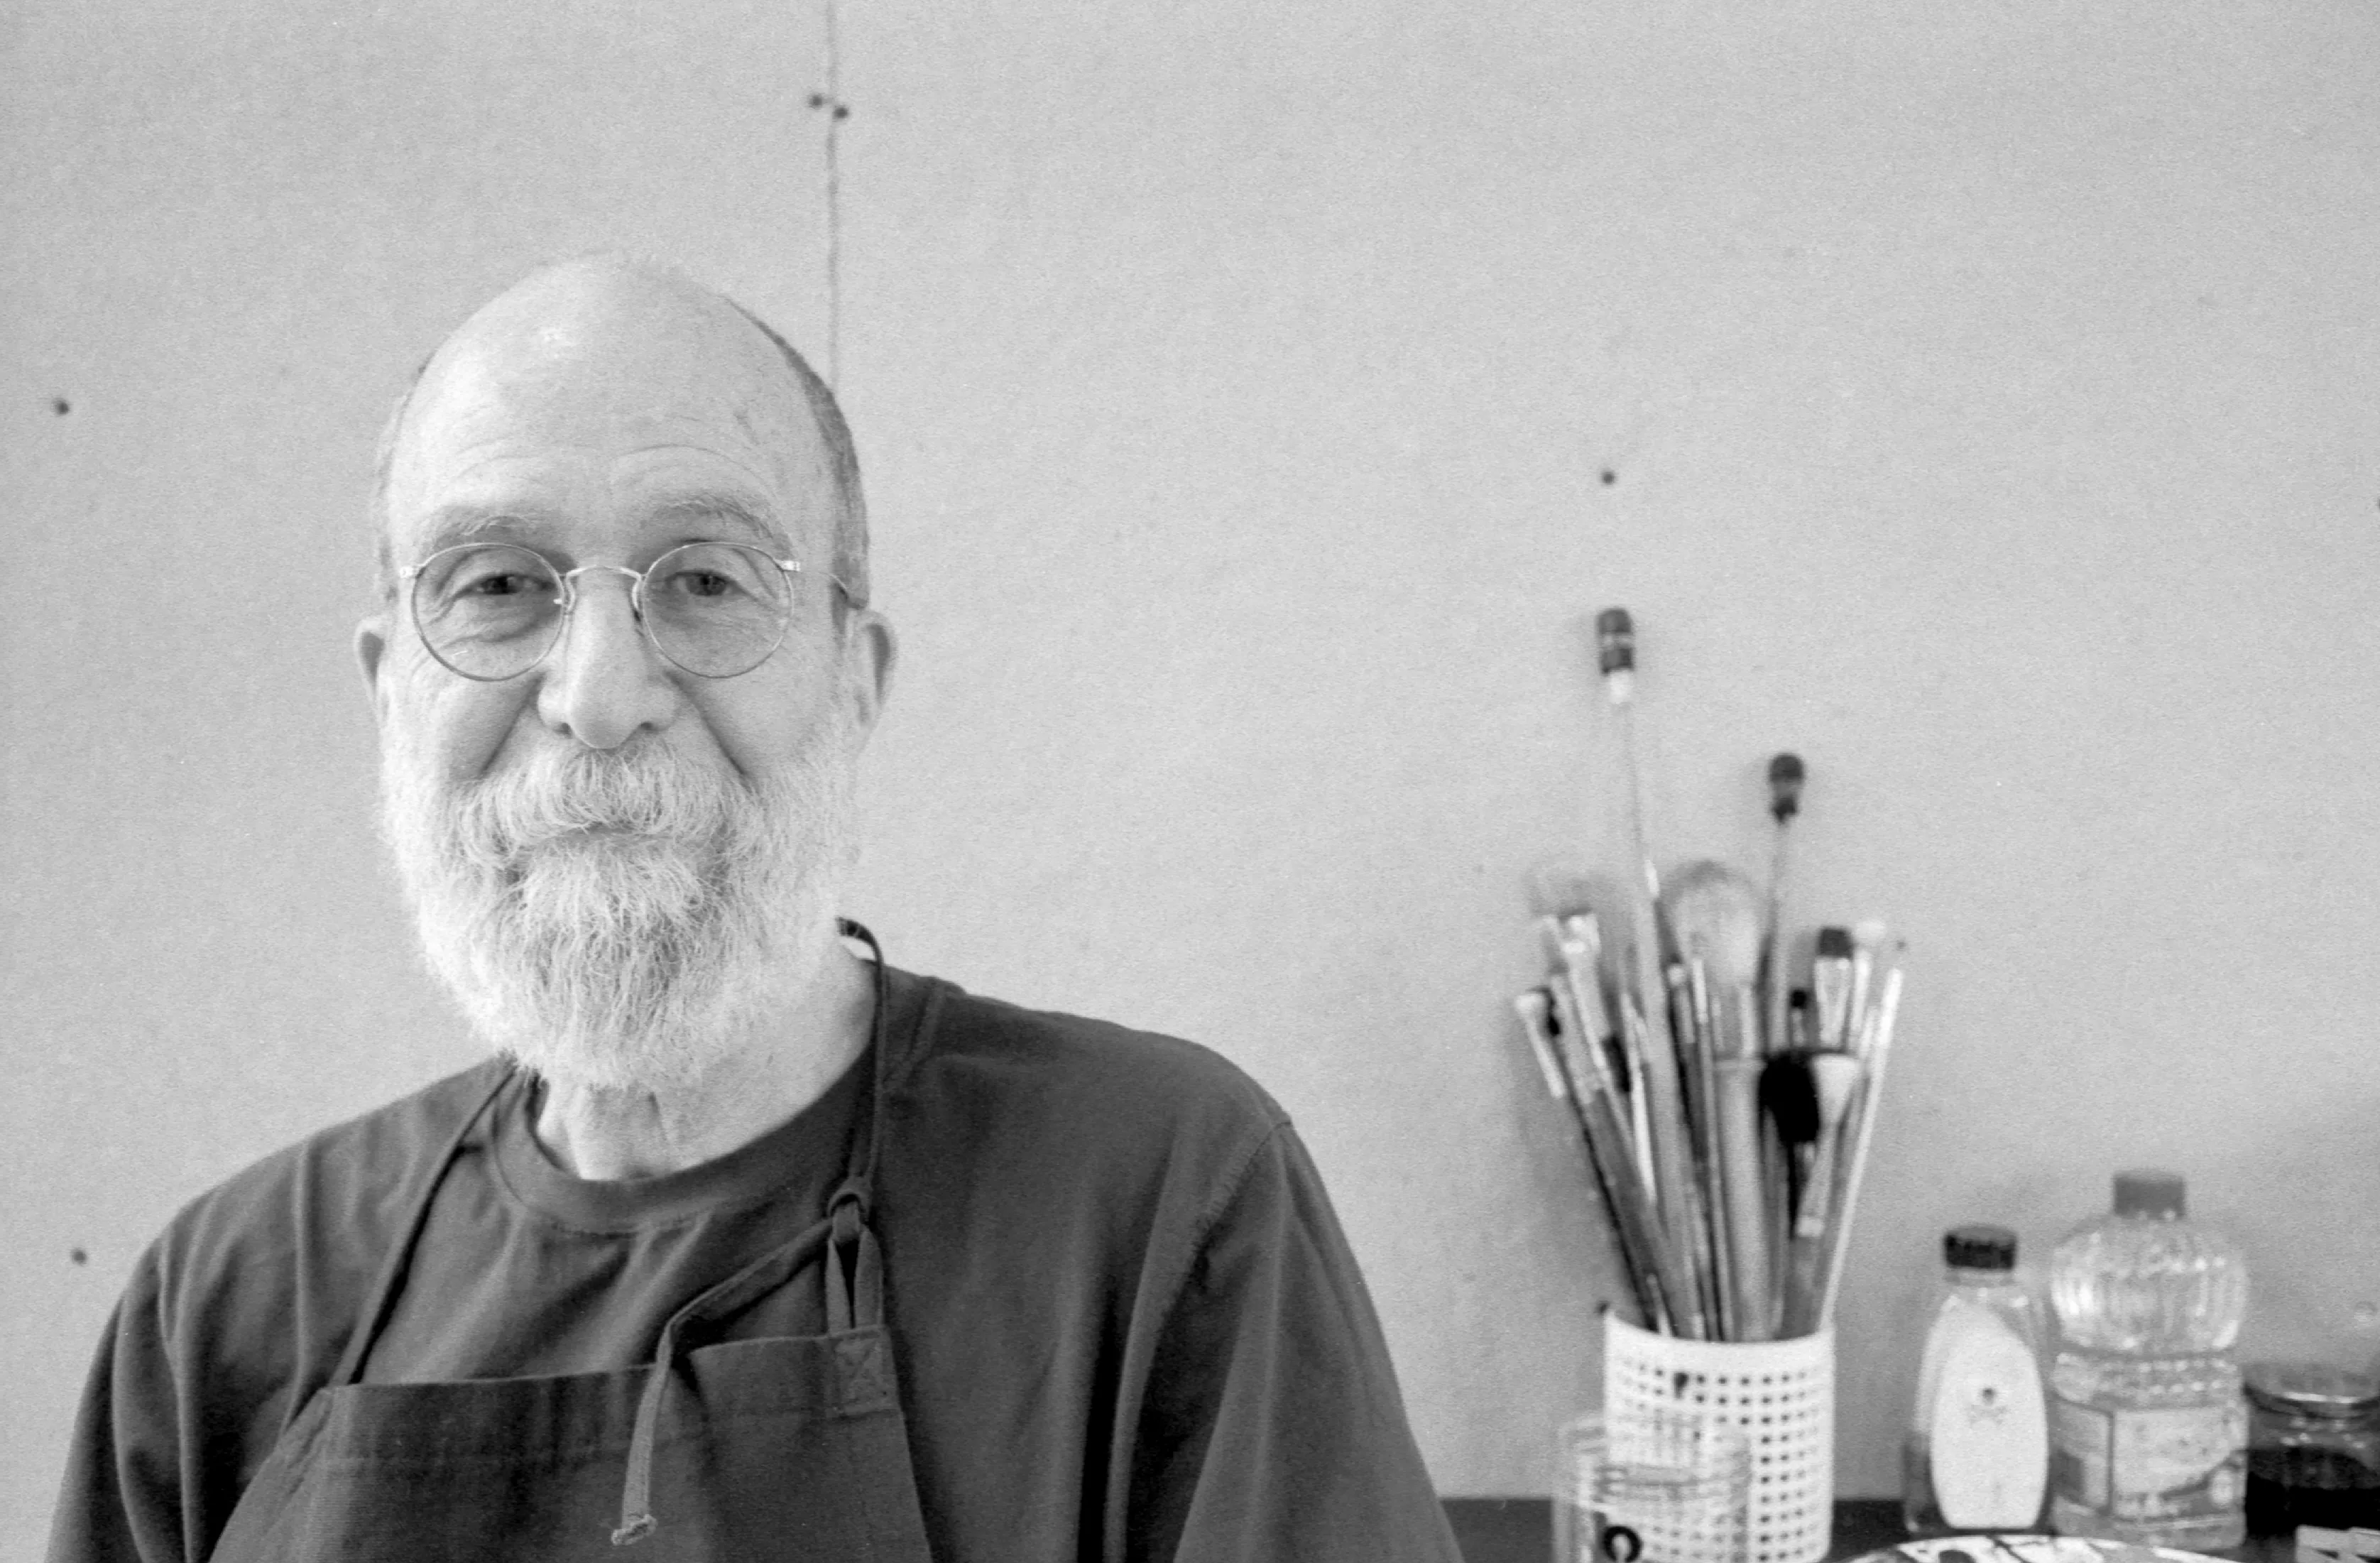 Kind old man wearing glasses with art supplies behind him